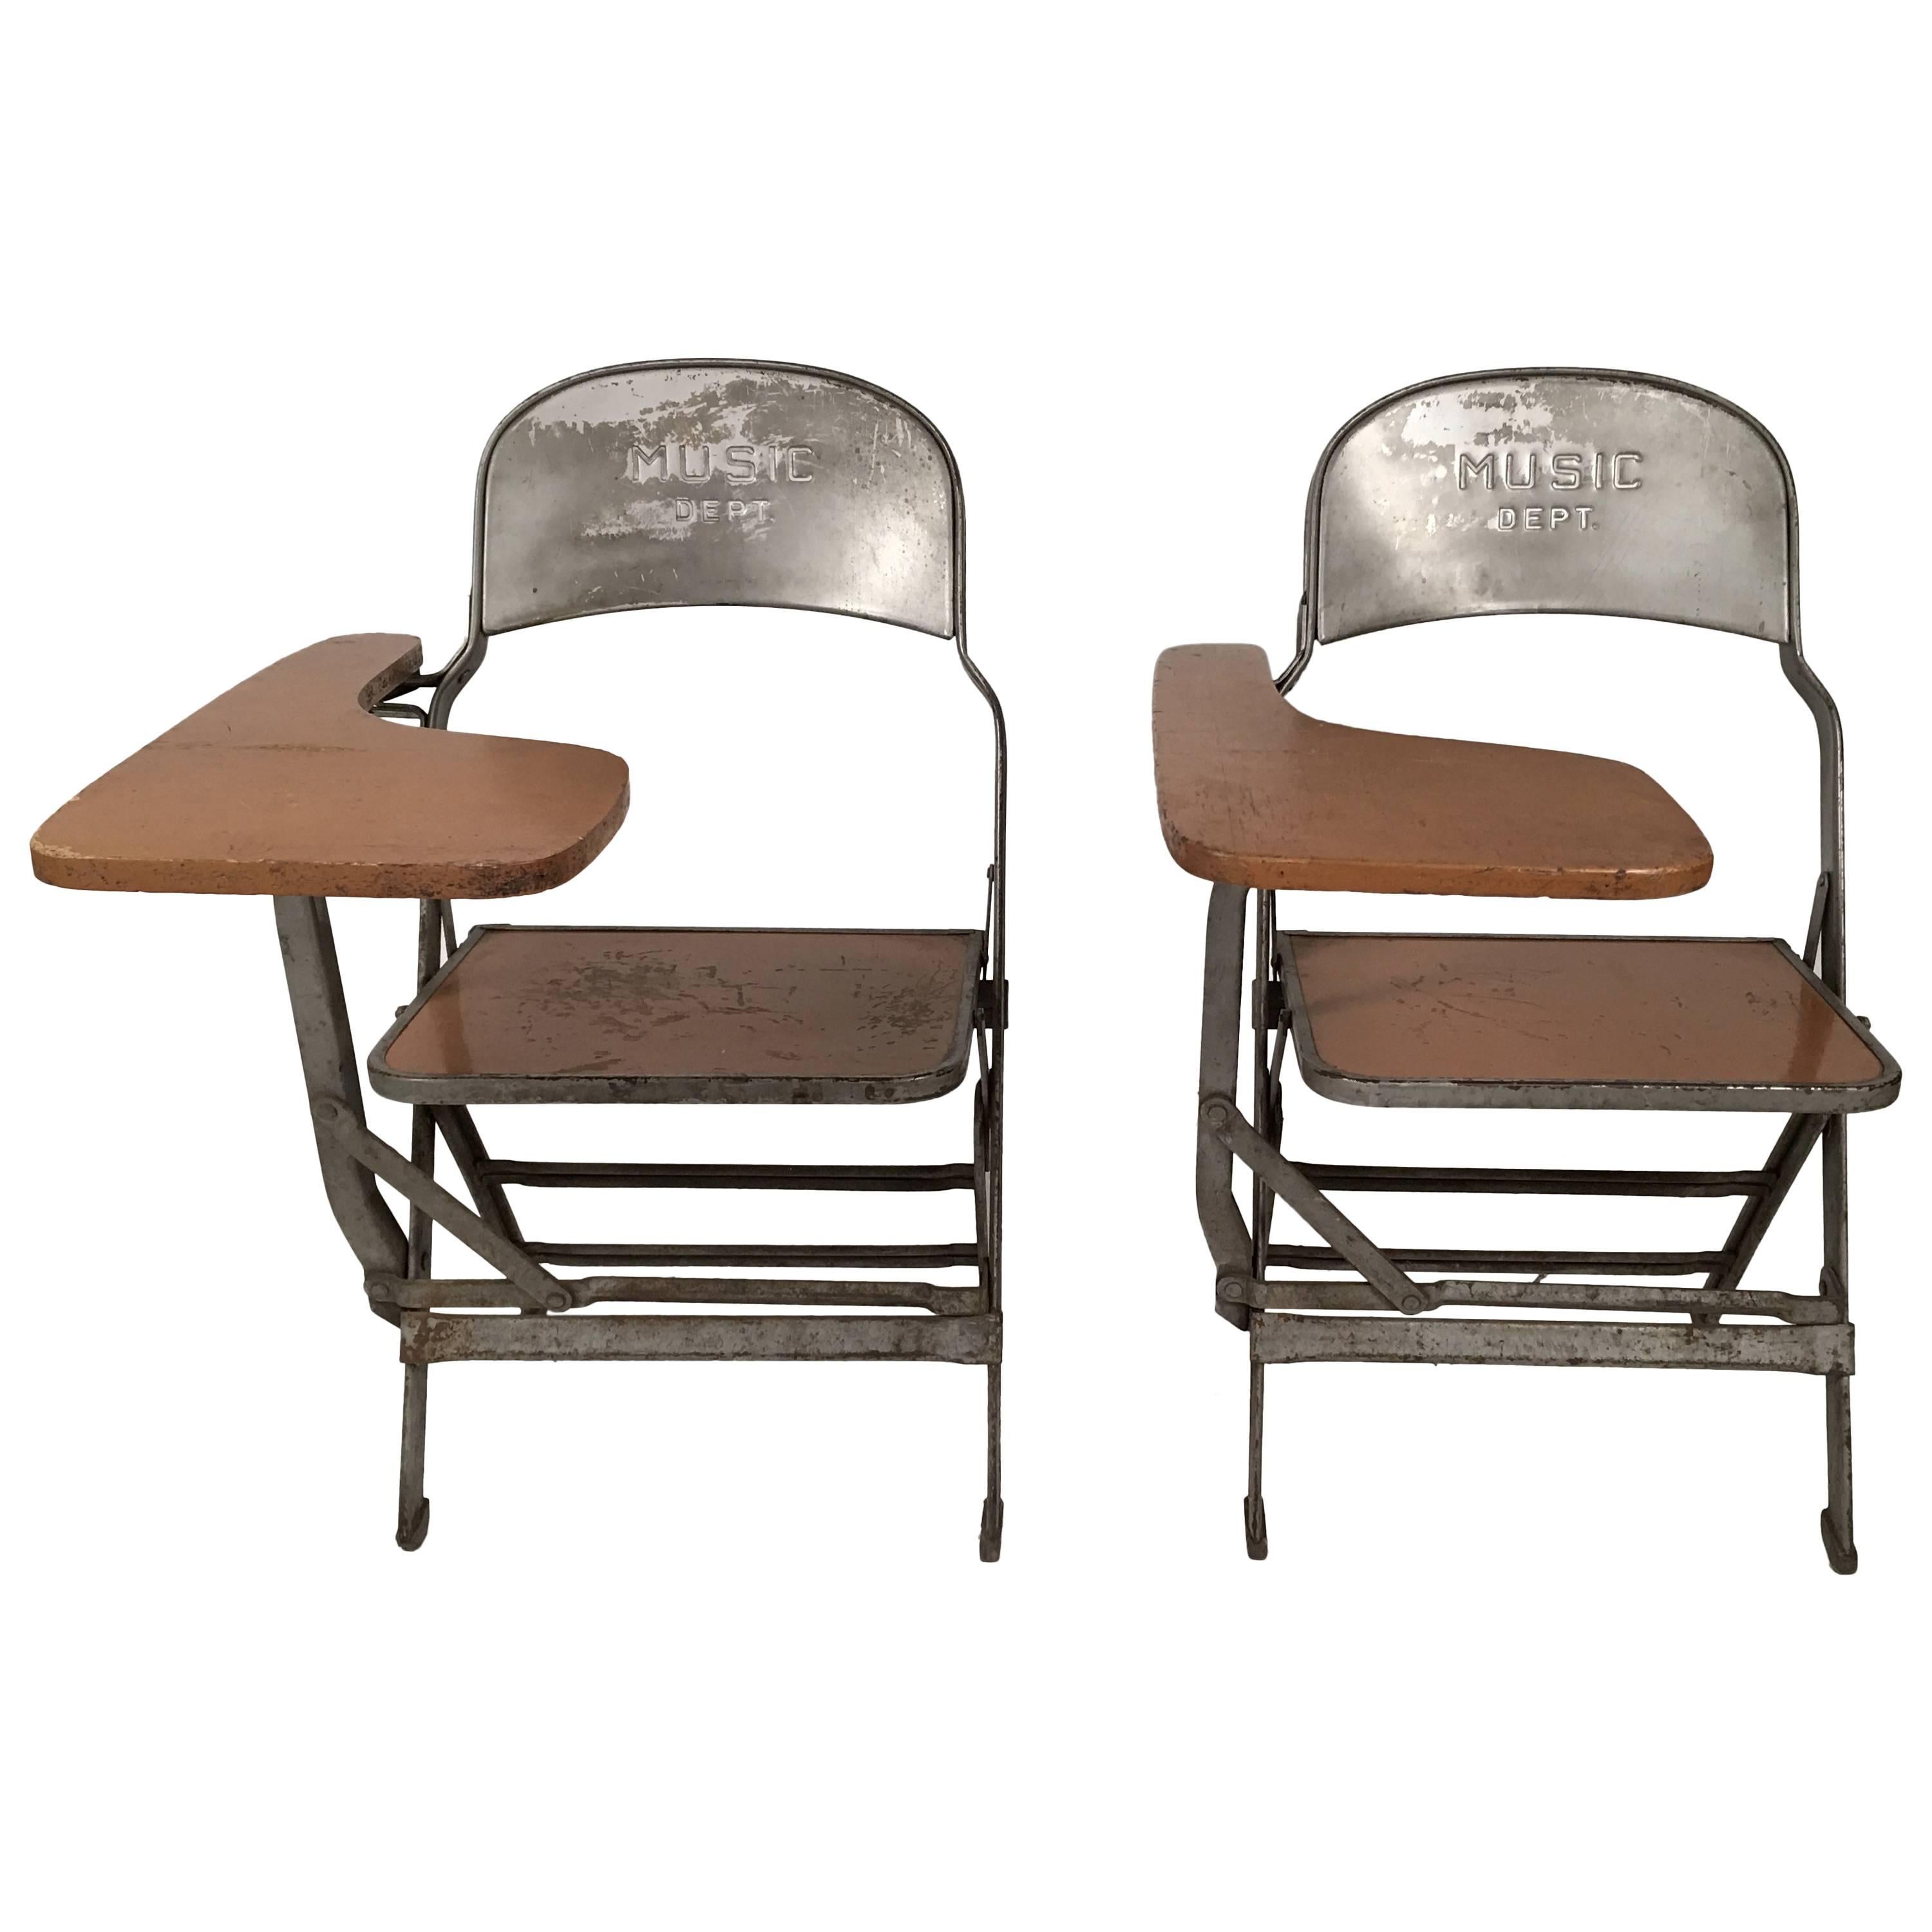 Pair of Music Department Folding Chairs with Desk Arms